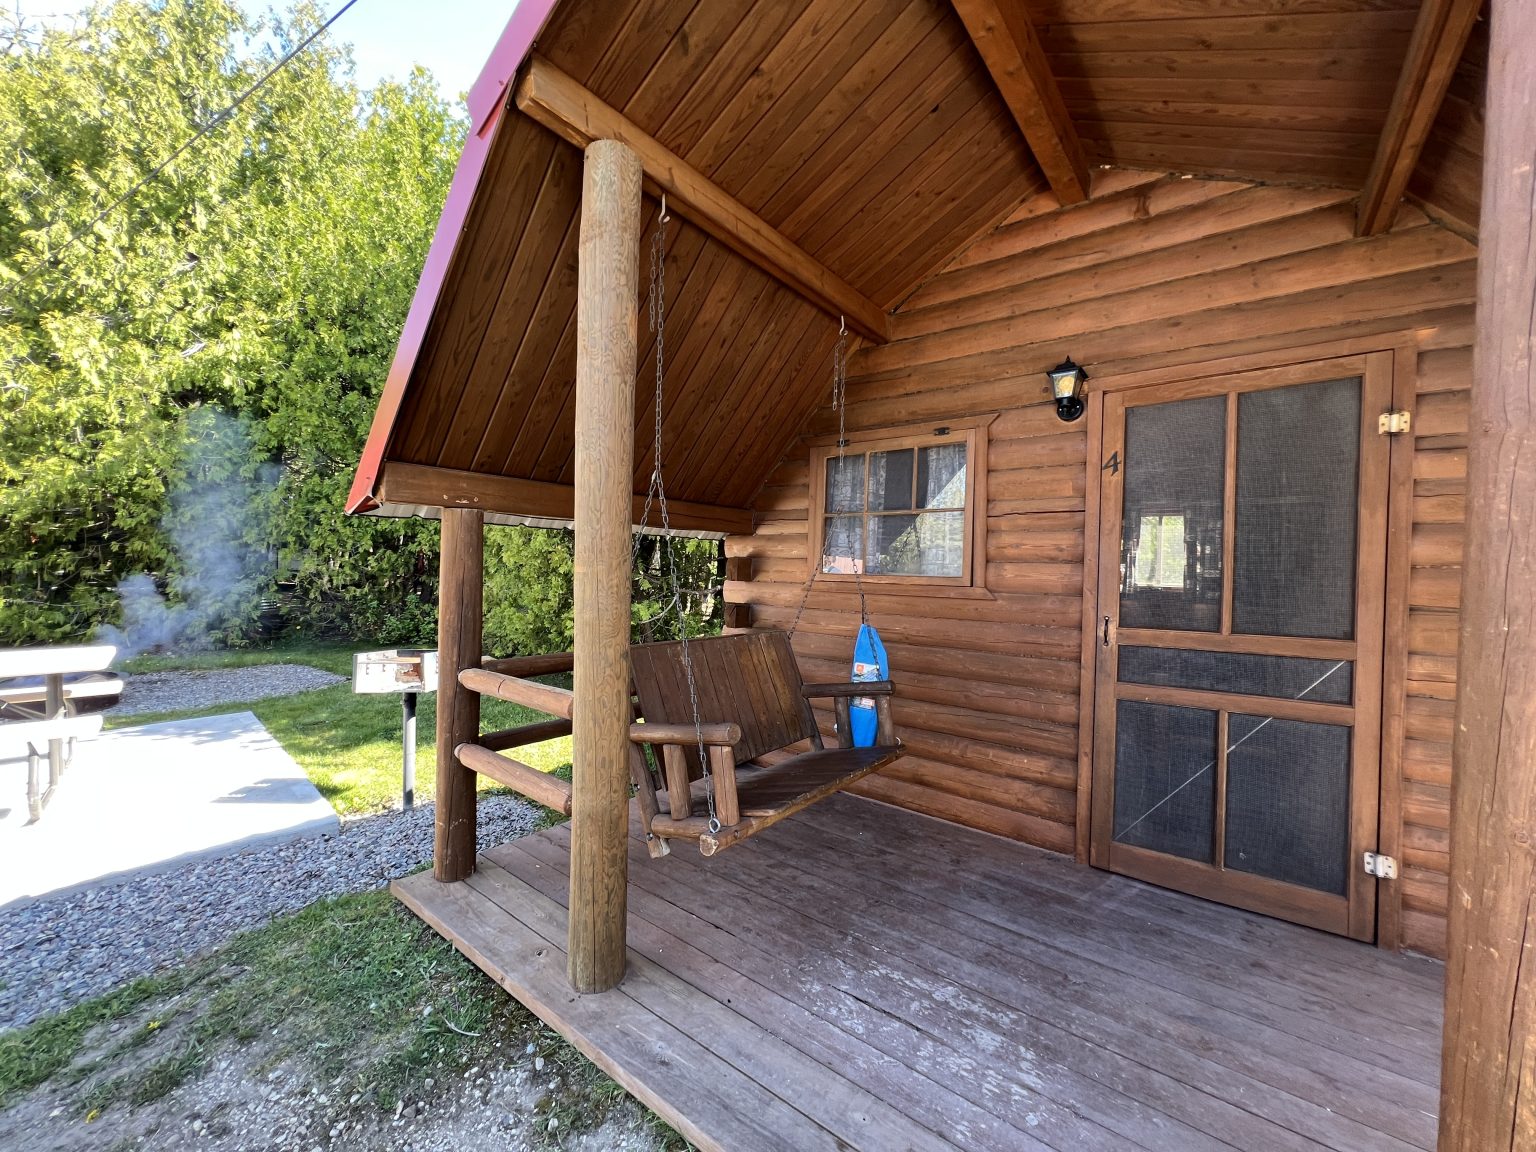 KOA St Ignace has cute log cabins for an affordable rate.